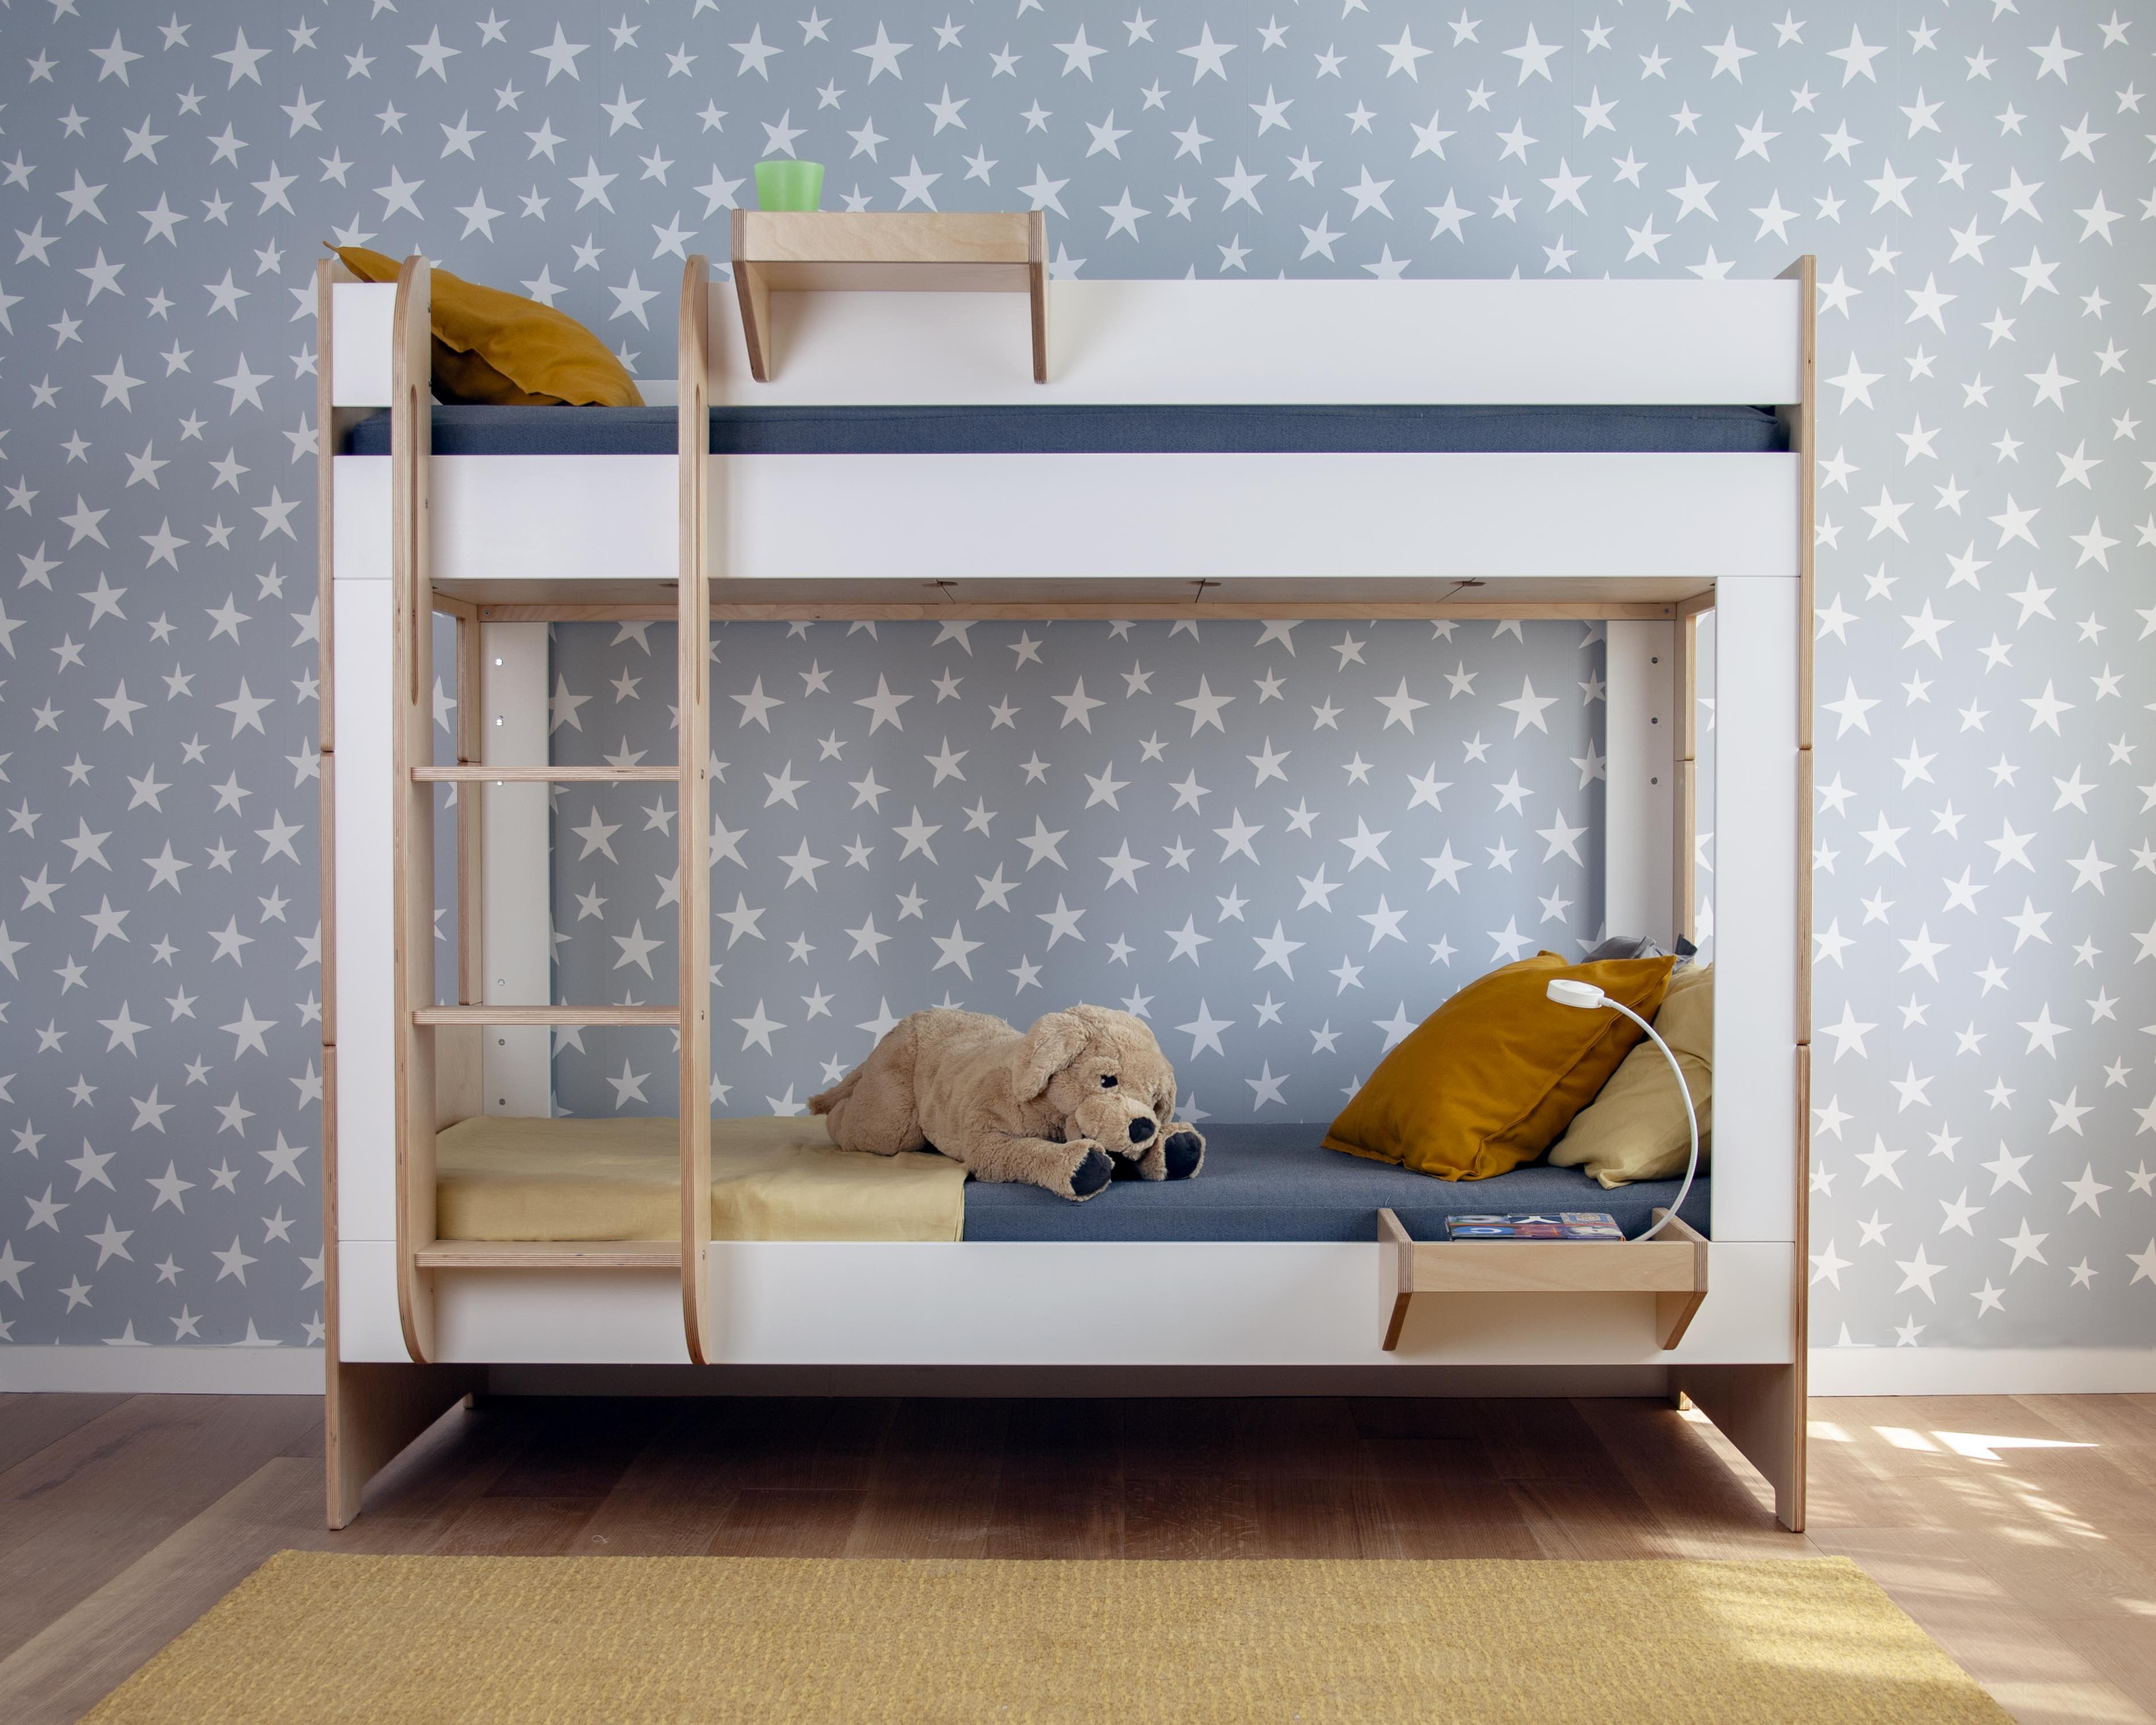 Modern bunk bed with stuffed animal on lower level, set against a light blue polka-dot wallpaper.